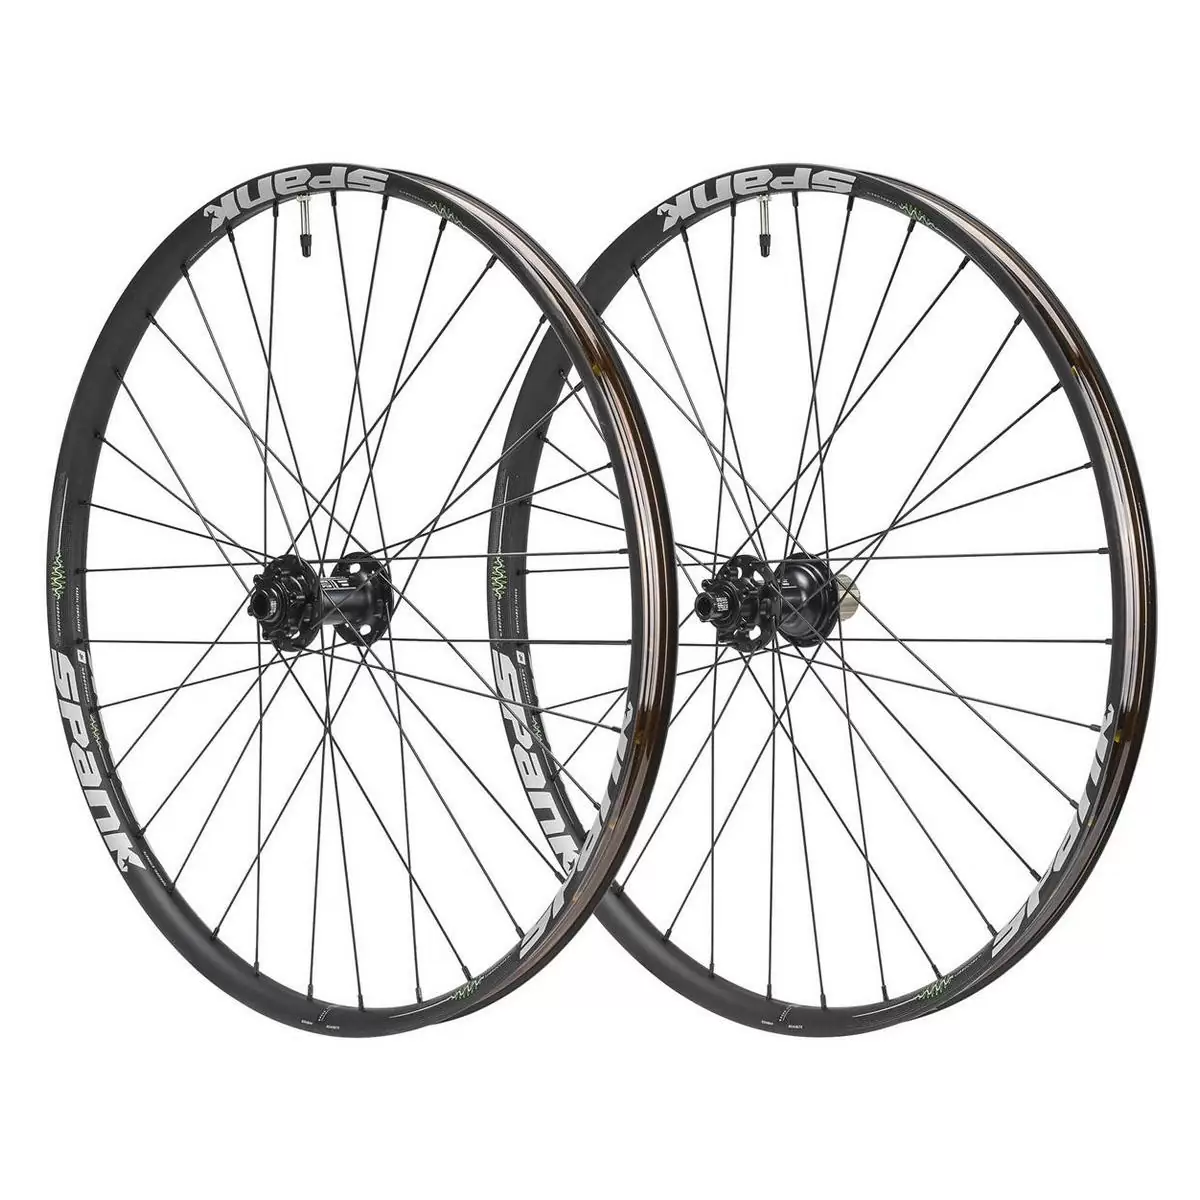 Roues vtt Spike Vibrocore 350 Boost 27.5'' tringle intérieure 30mm shimano 11v - image